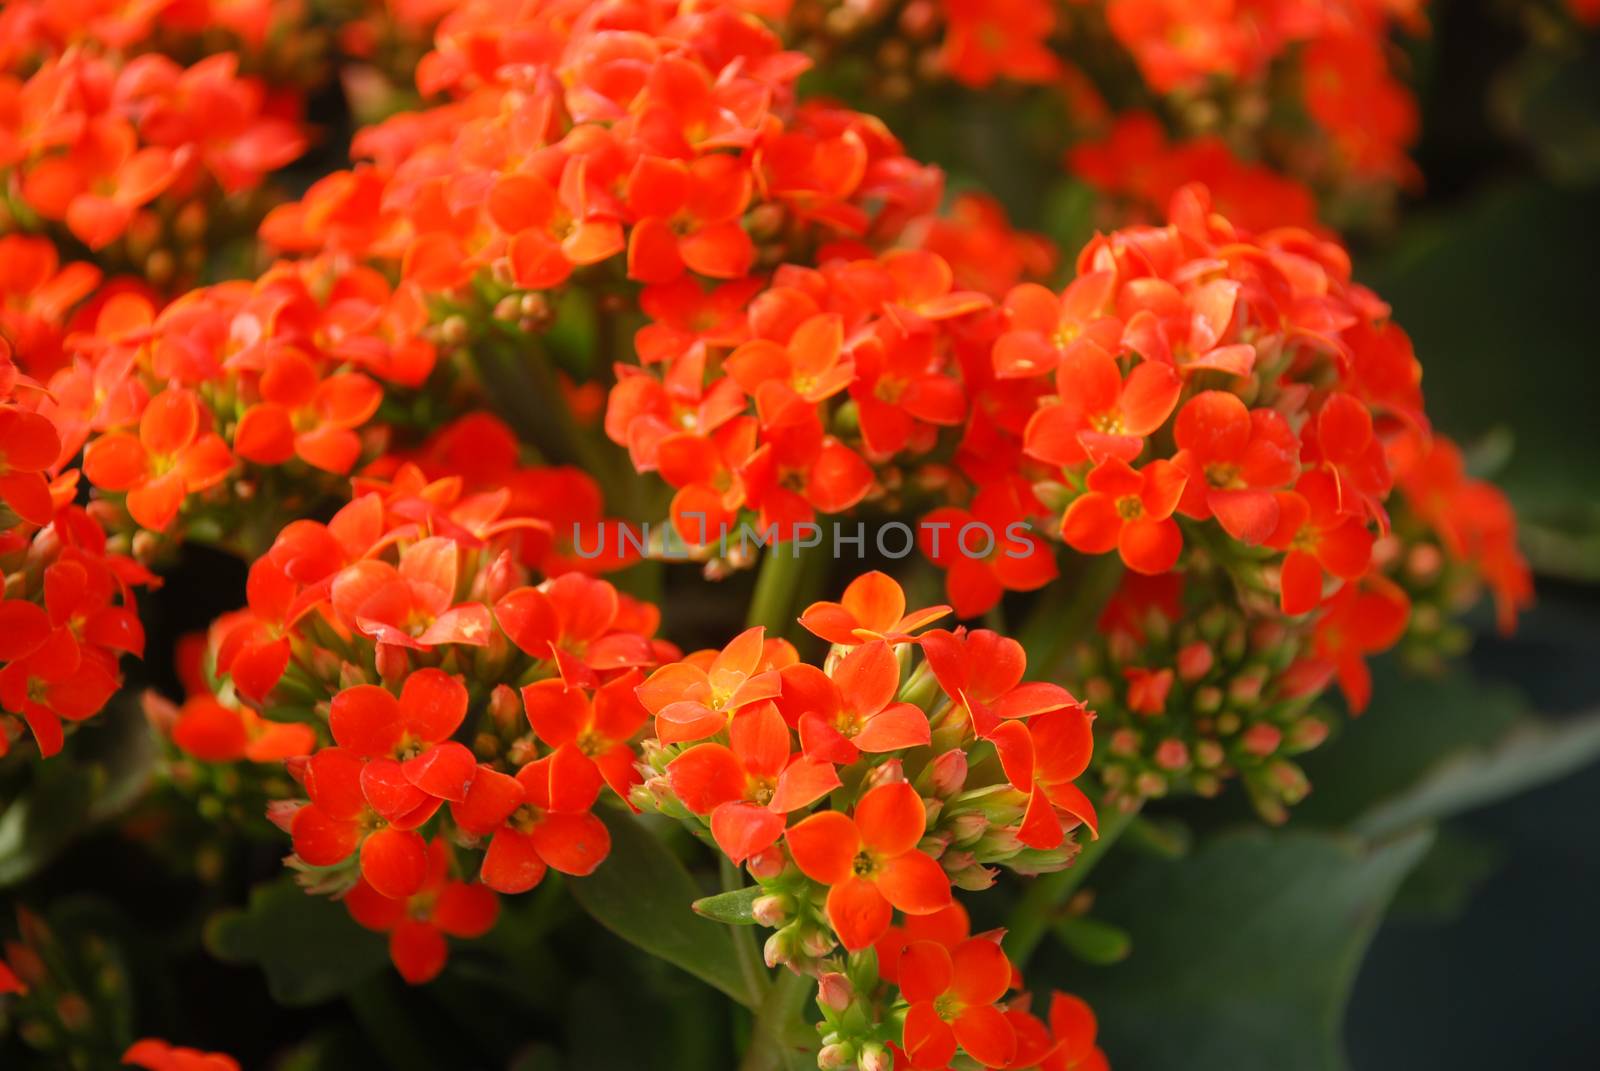 Kalanchoe plant with red flowers, Kalanchoe blossfeldiana by yuiyuize